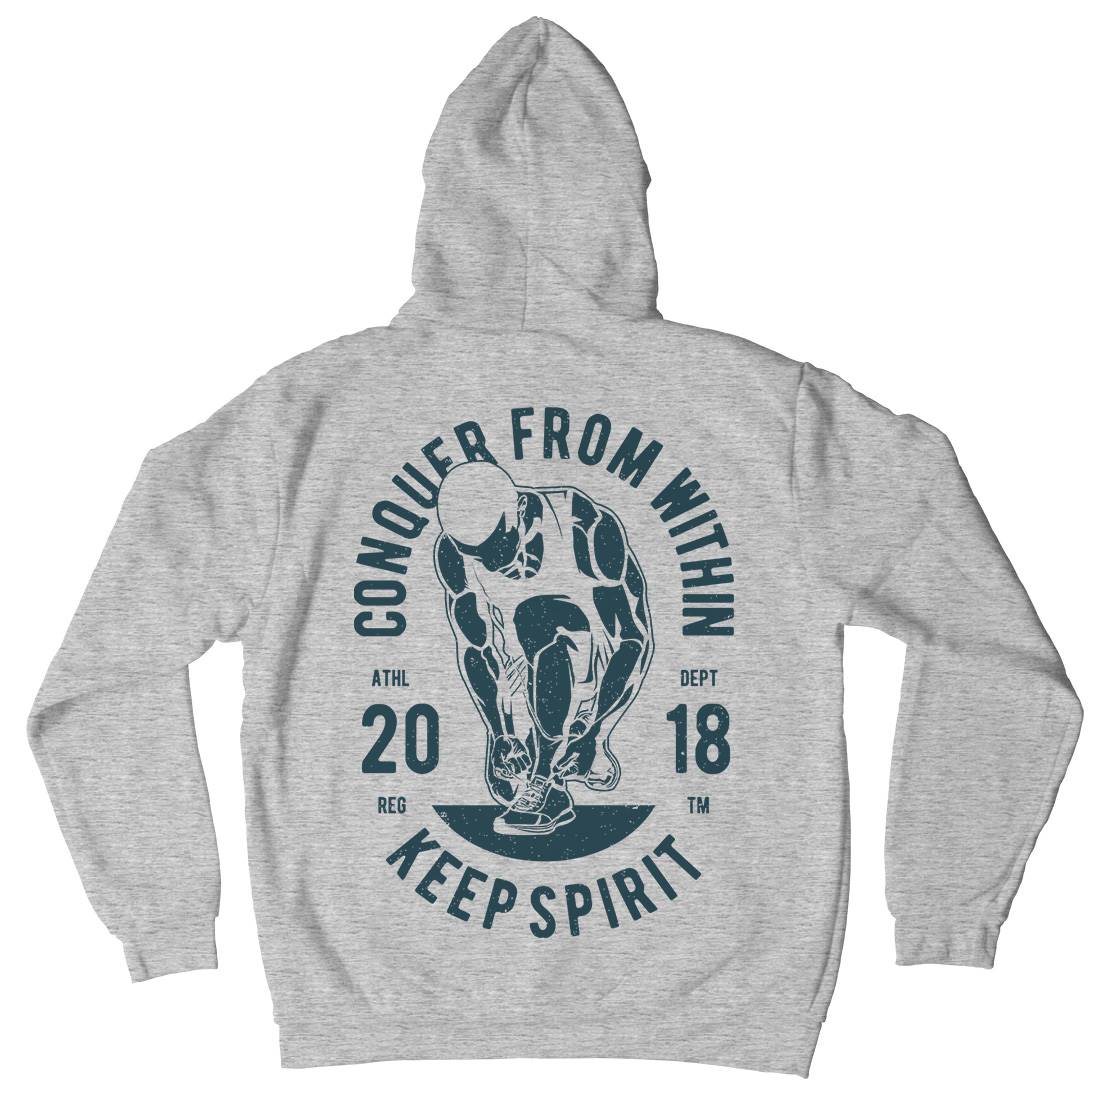 Conquer From Within Kids Crew Neck Hoodie Sport A638